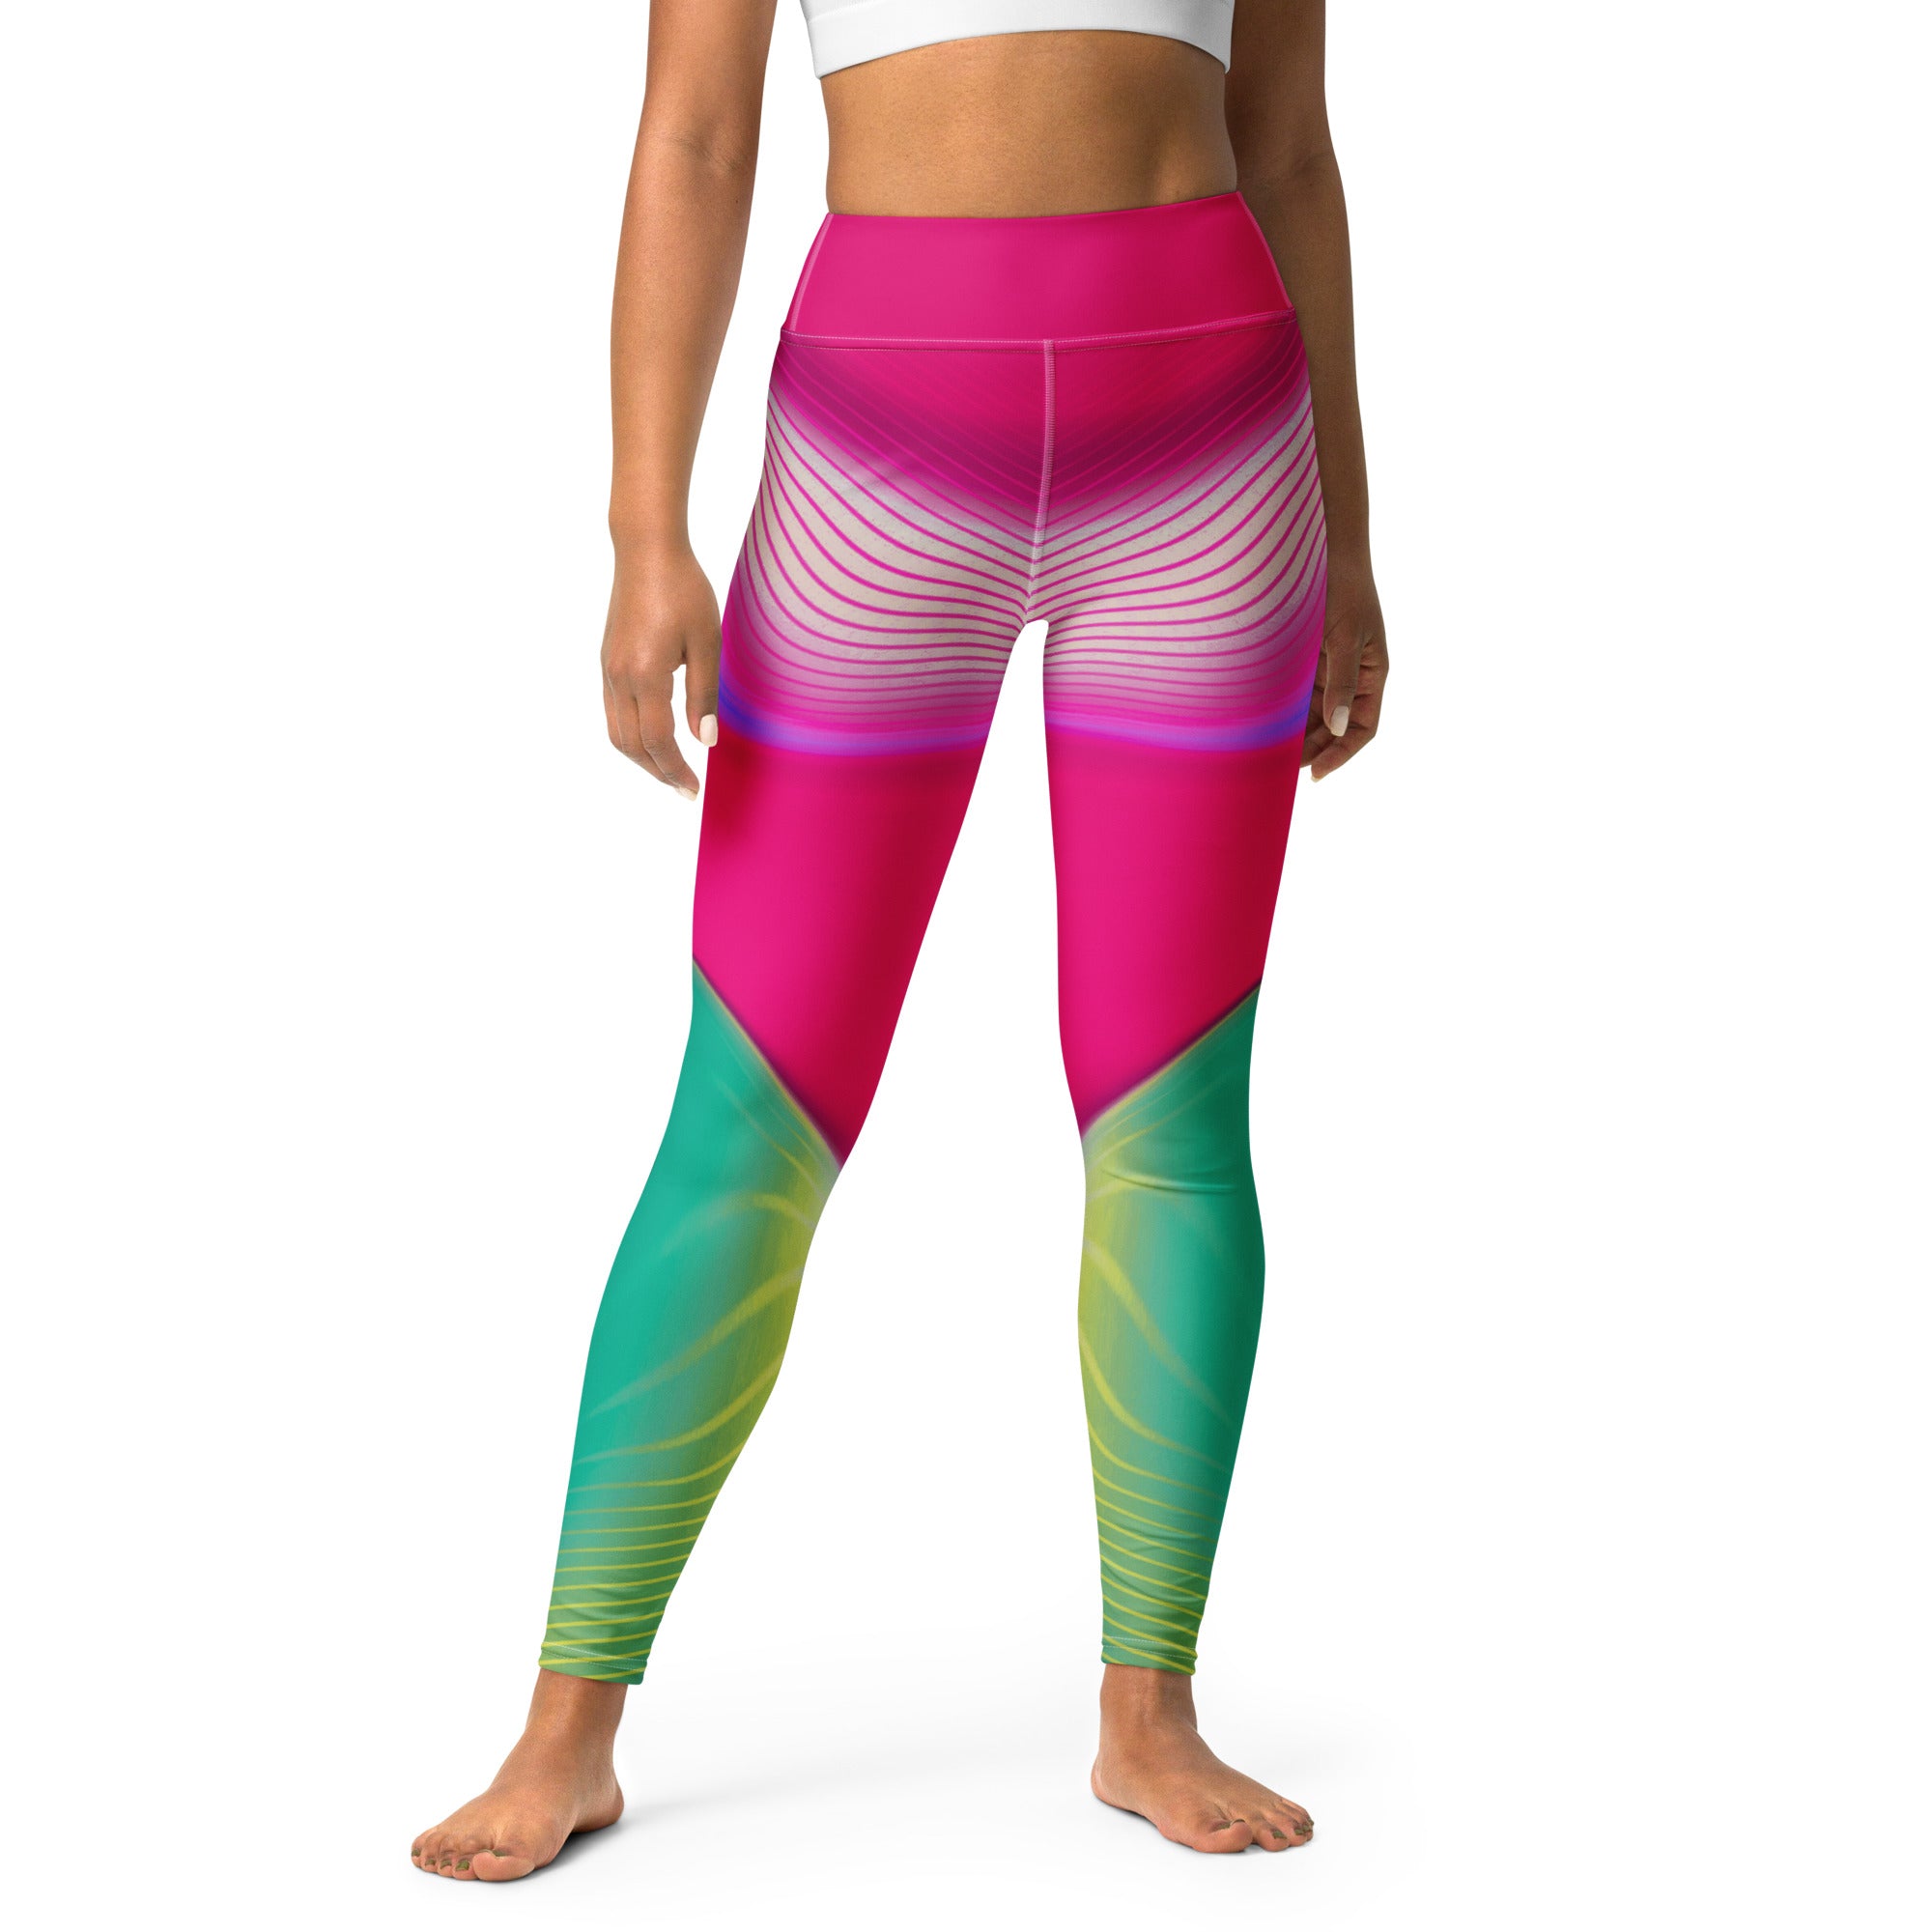 Aurora Wave Leggings complementing the tranquility of a sunrise meditation session.